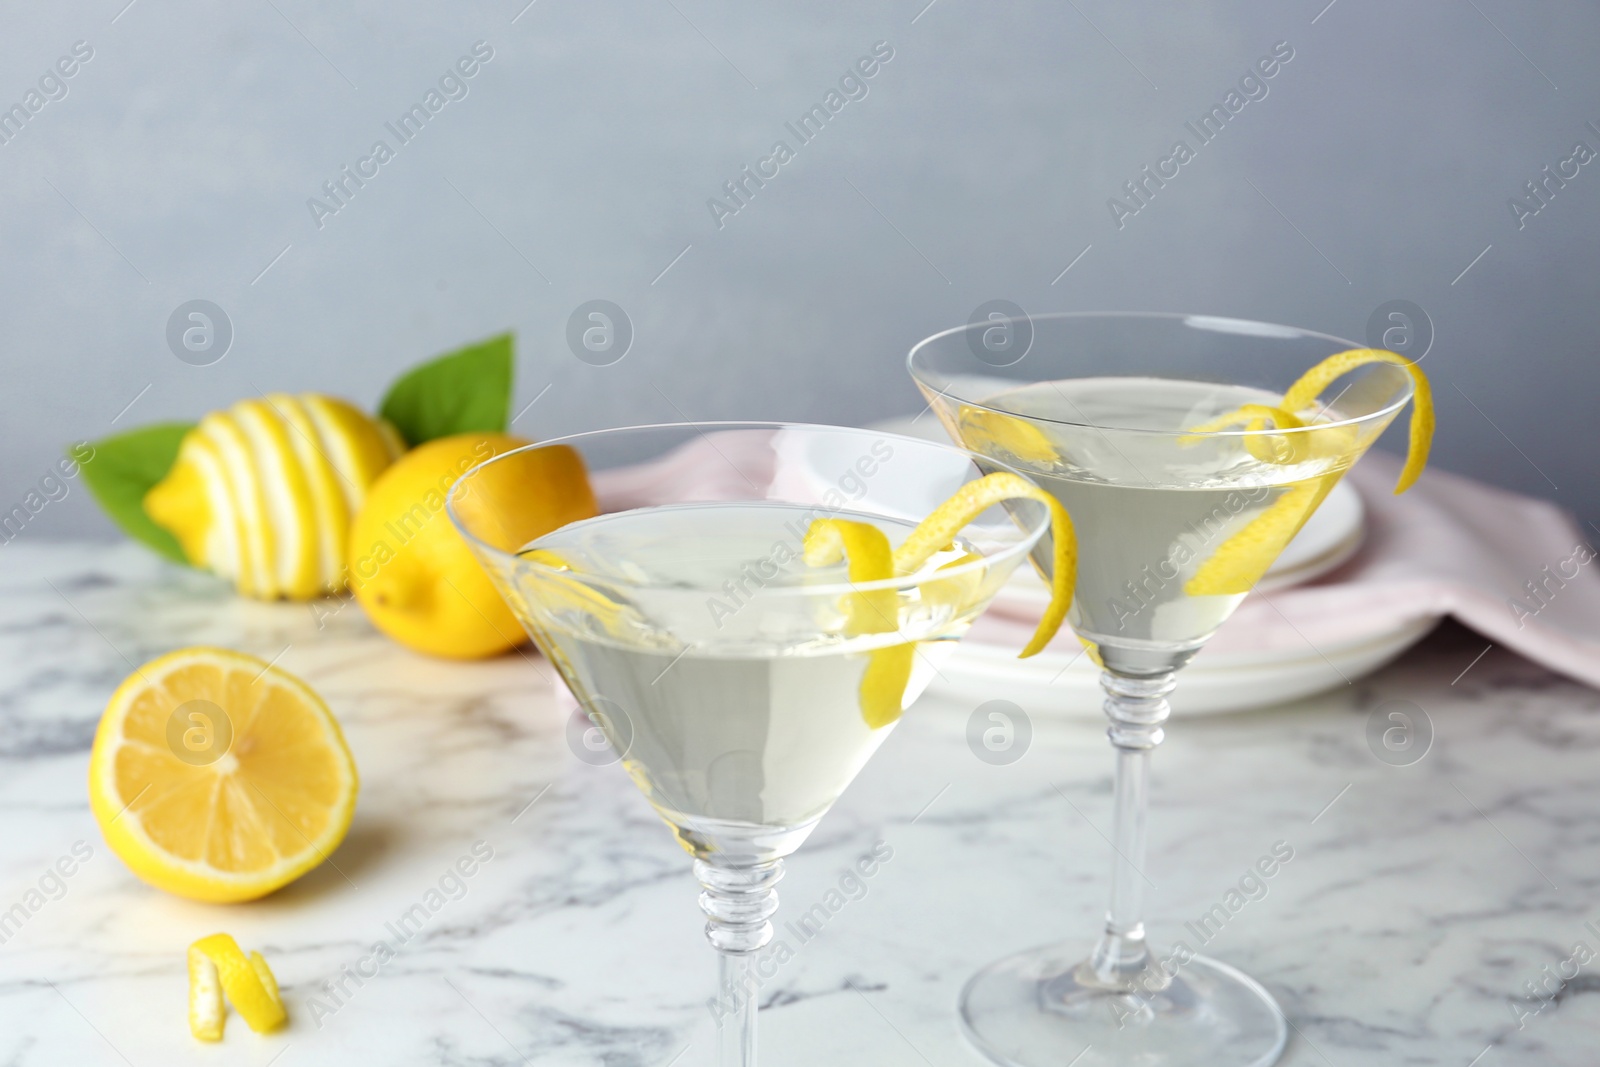 Photo of Glasses of lemon drop martini cocktail with zest on marble table against grey background